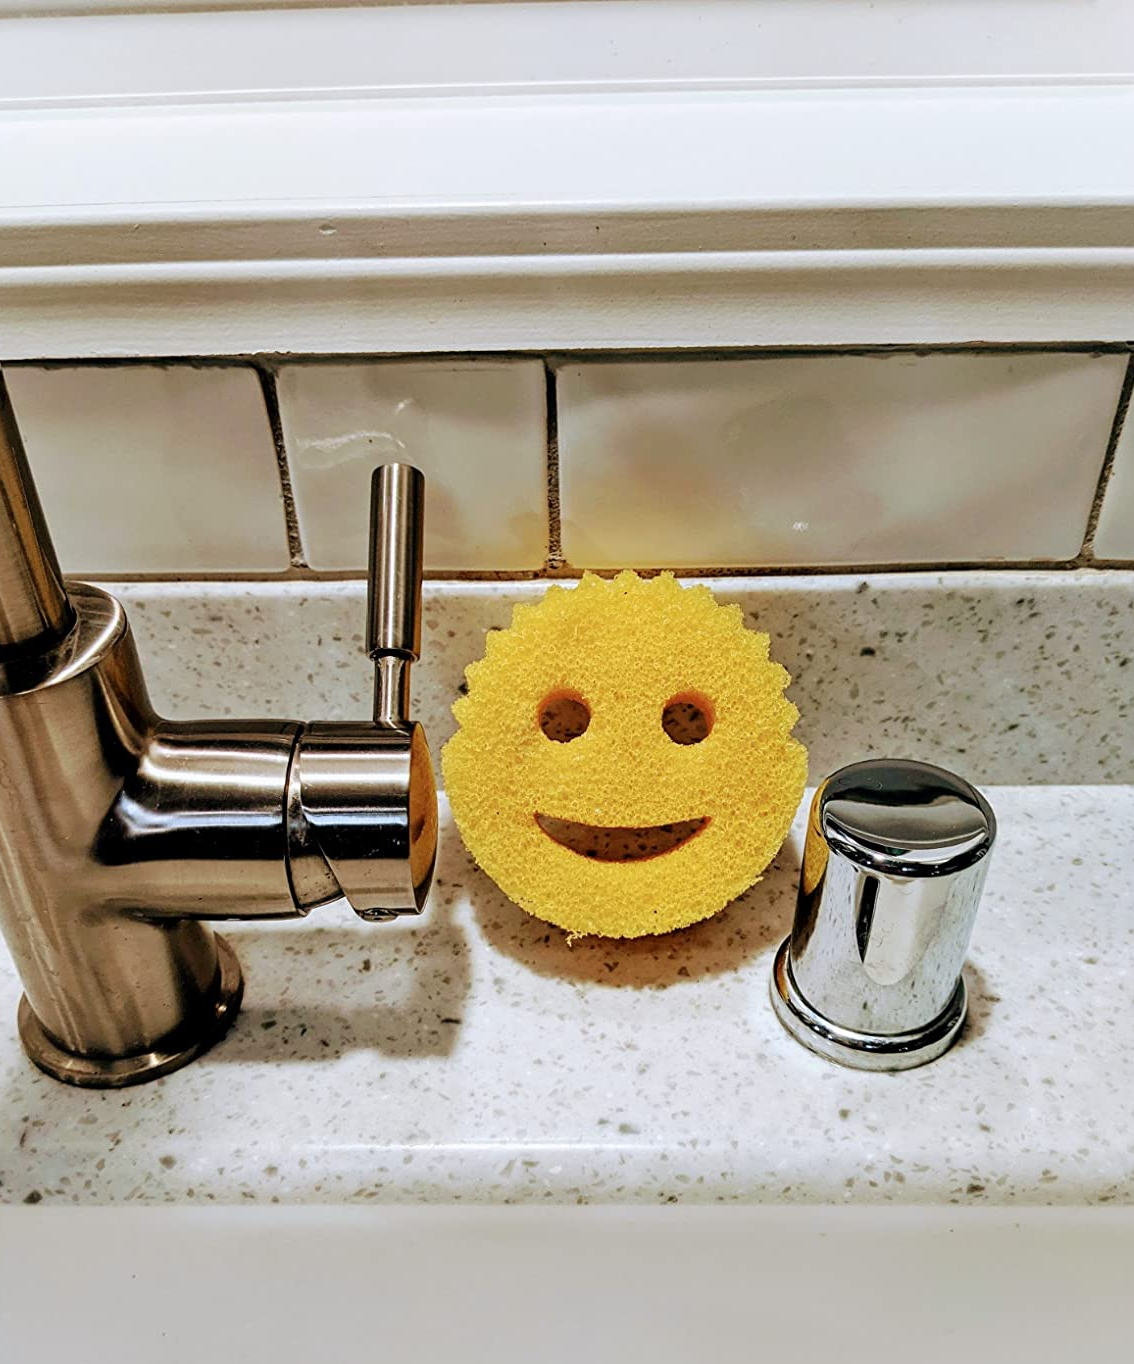 a reviewer's sponge on the sink